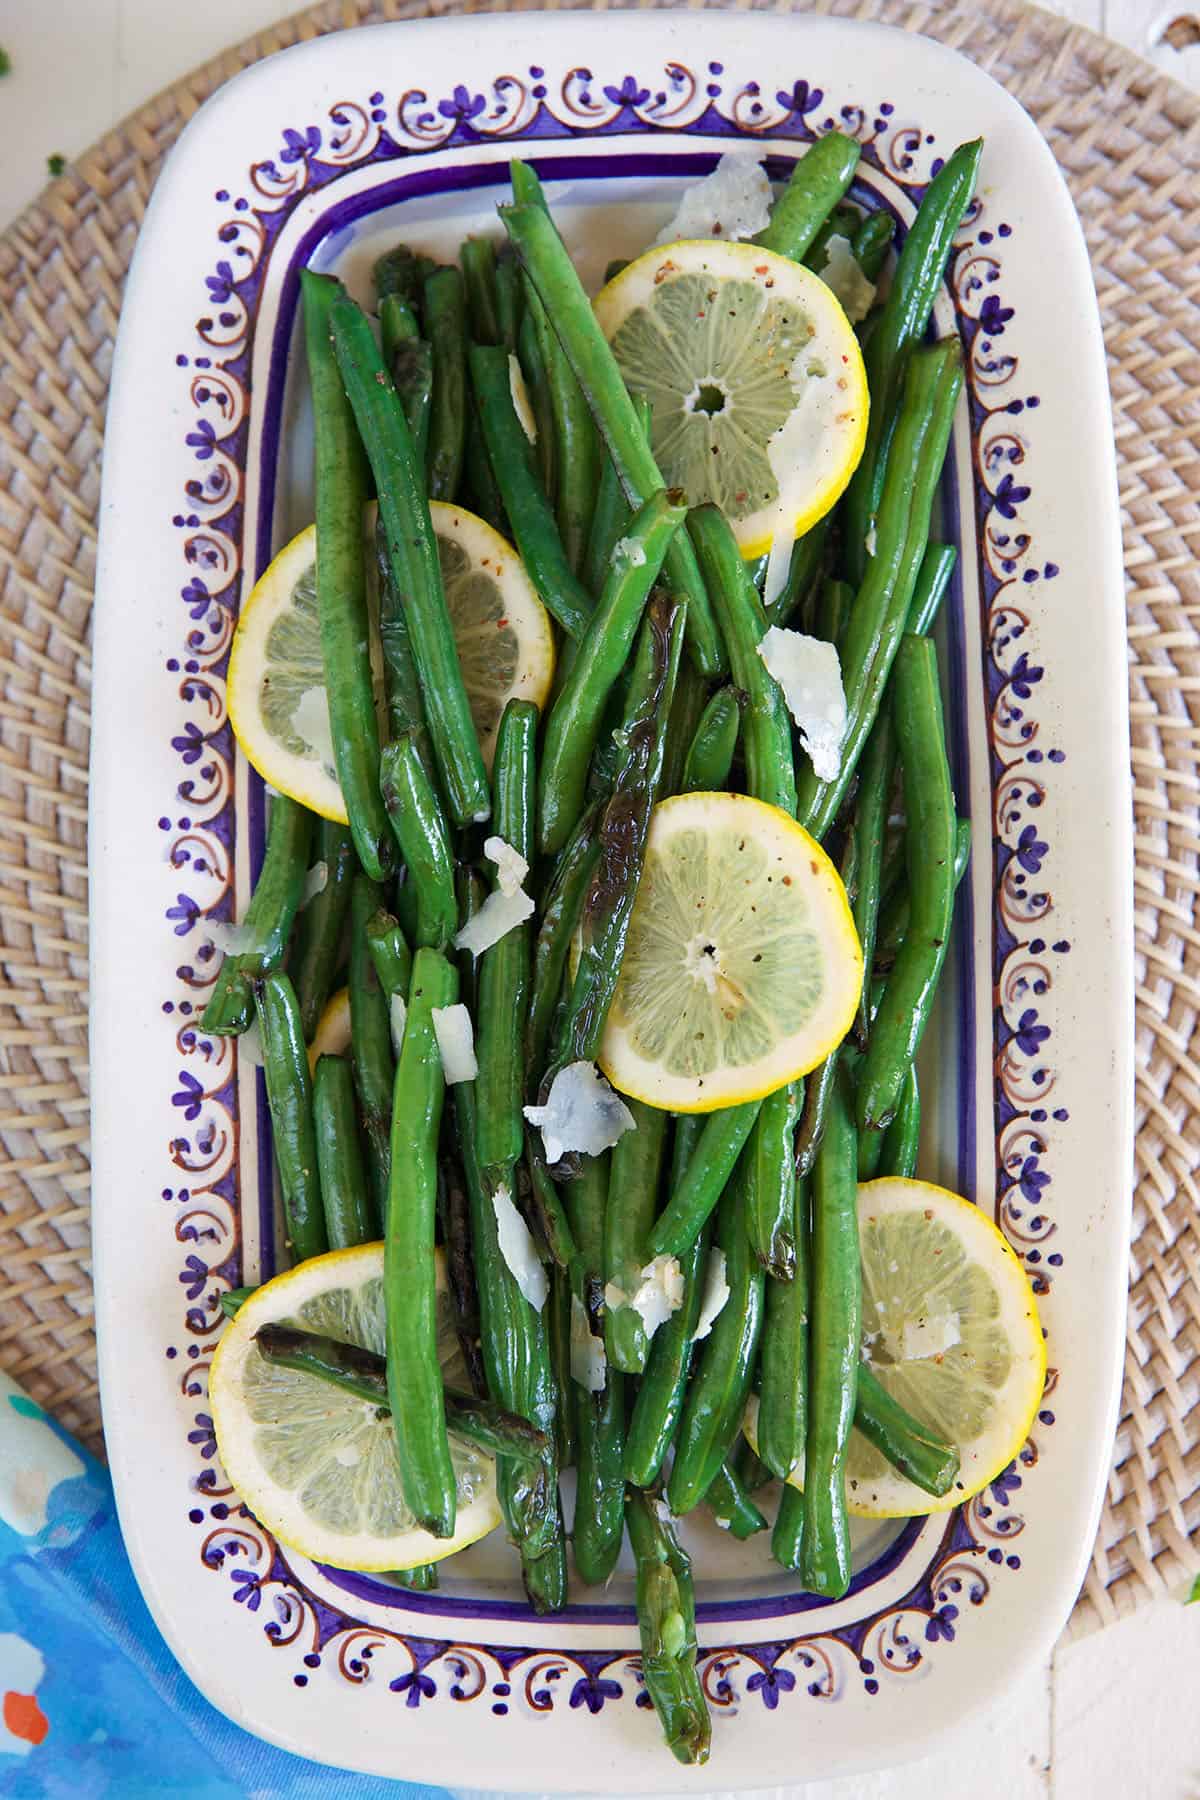 Green beans are plated with parmesan and lemon slices.